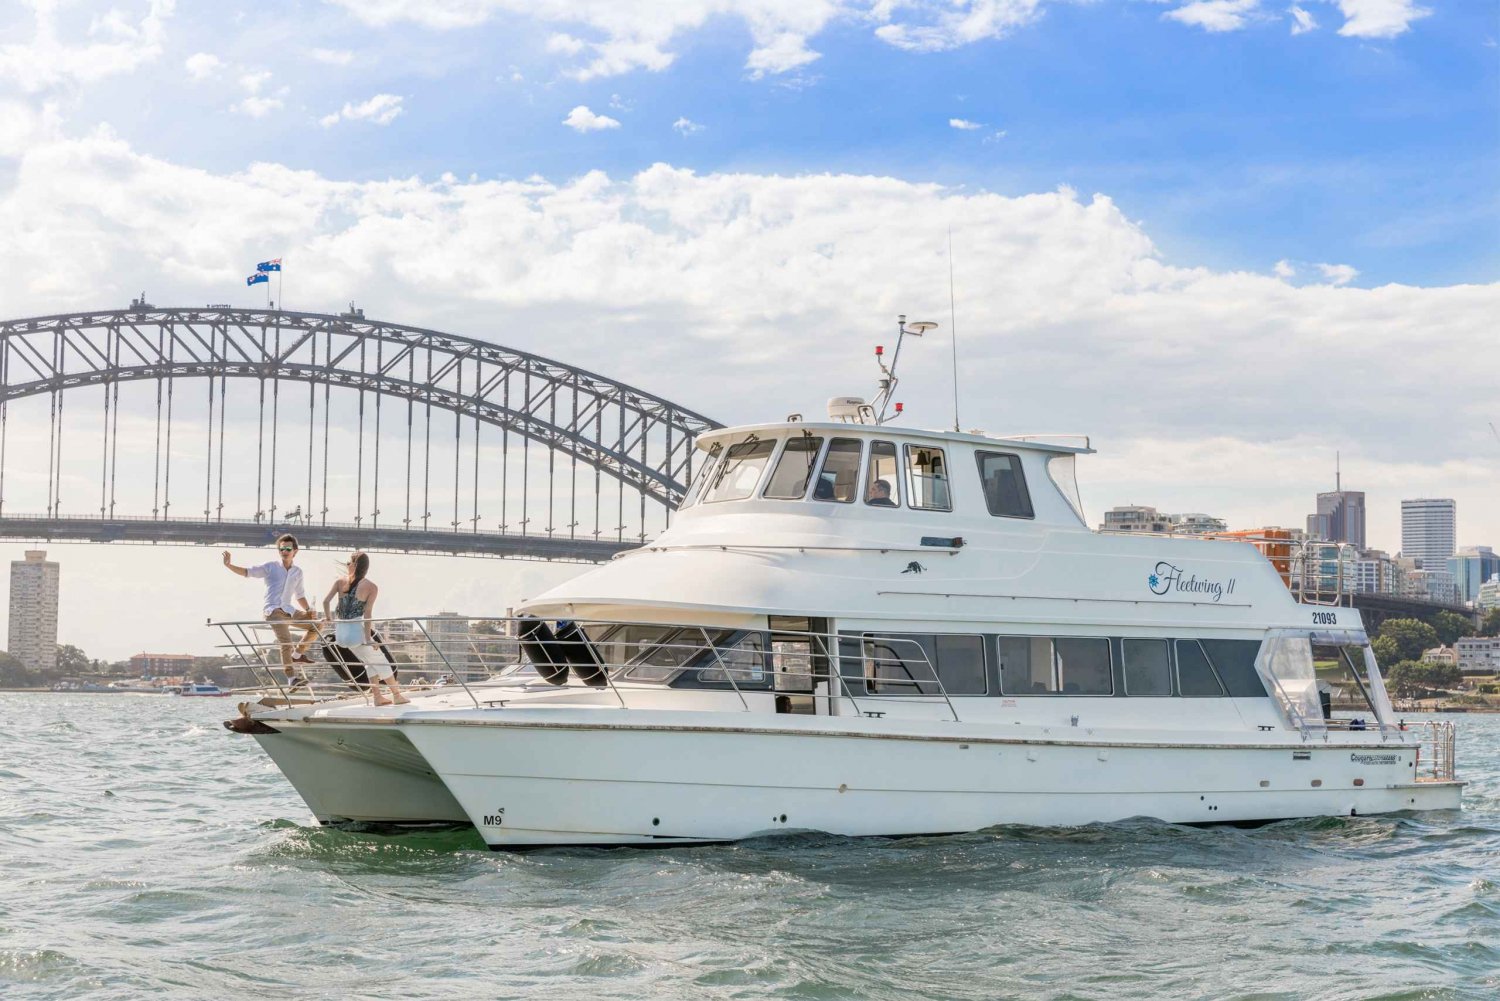 Sydney: 1.5 Hour Vivid Harbor Cruise with Canapes